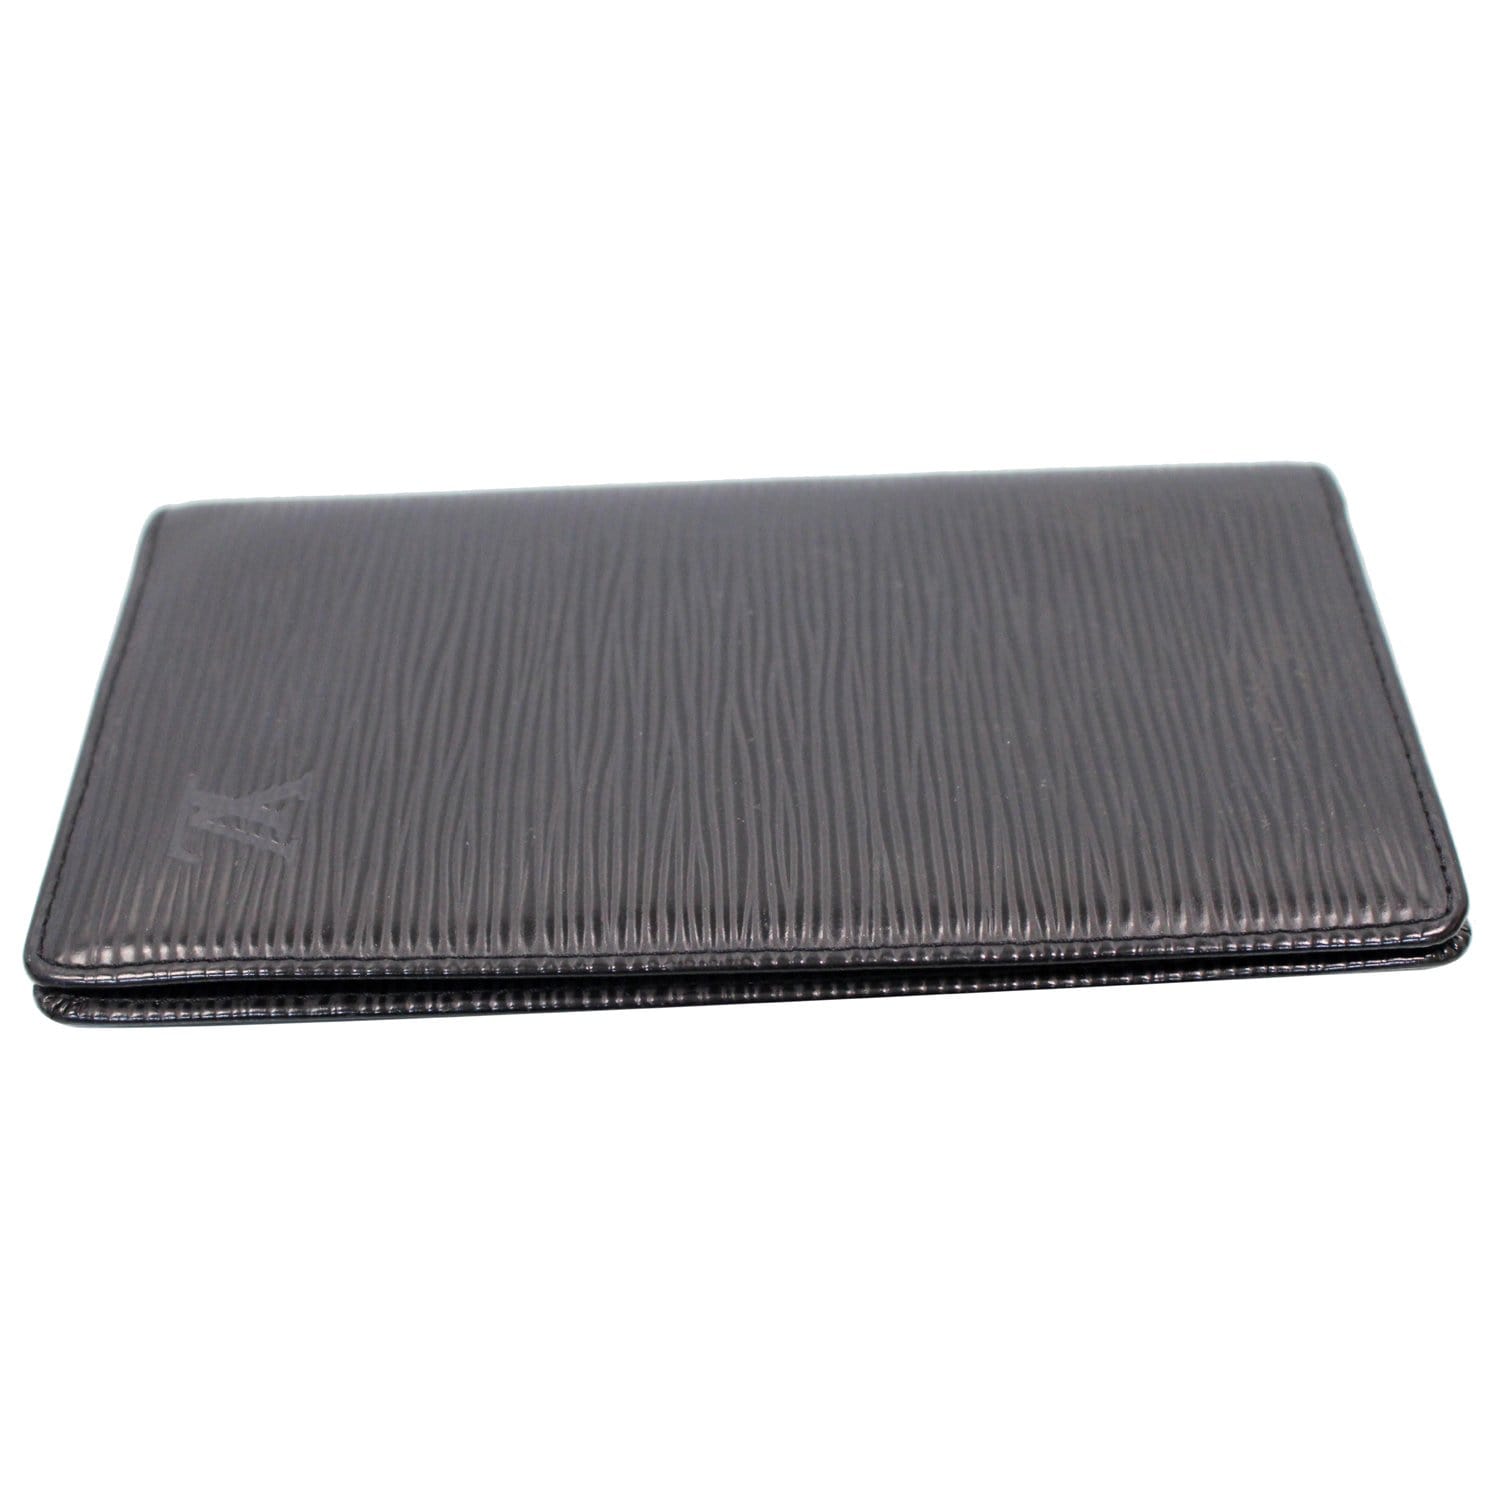 Brazza Wallet Epi Leather - Men - Small Leather Goods